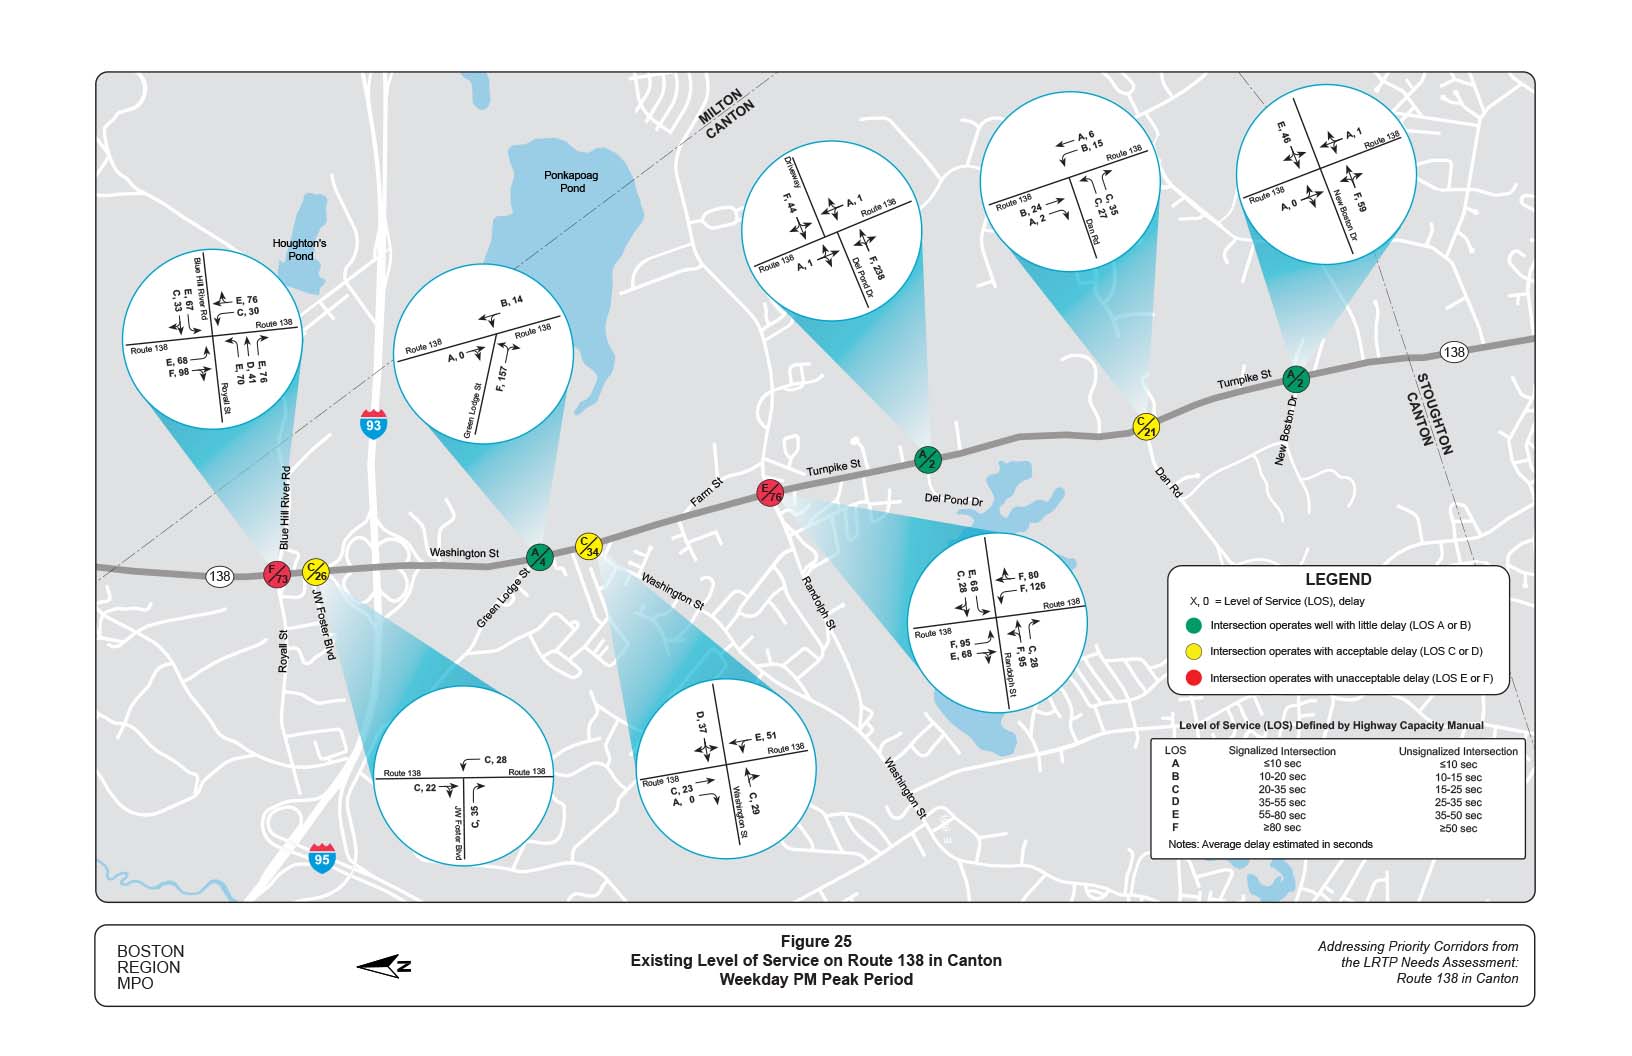 Figure 25 is a map of the study area with diagrams showing the existing level of service provided by intersections on Route 138 during the weekday PM peak period.